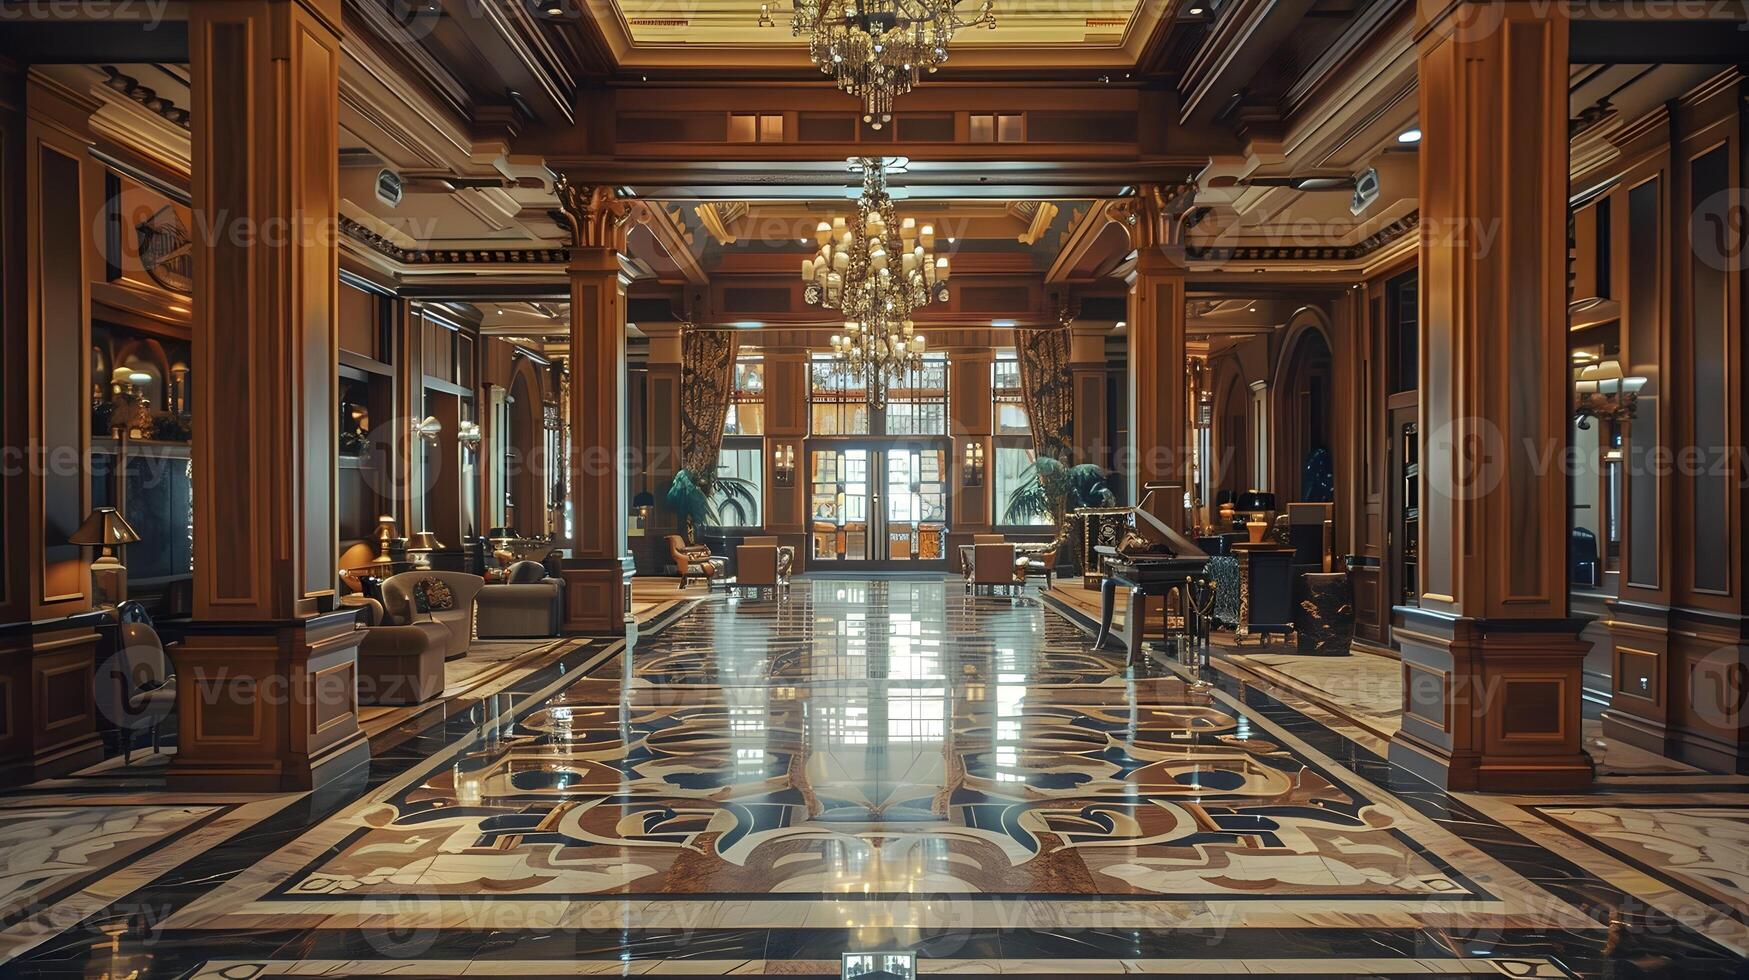 Opulent and Grandiose Interior of a Prestigious Historical Palace with Intricate Architectural Details and Ornamental Decor photo